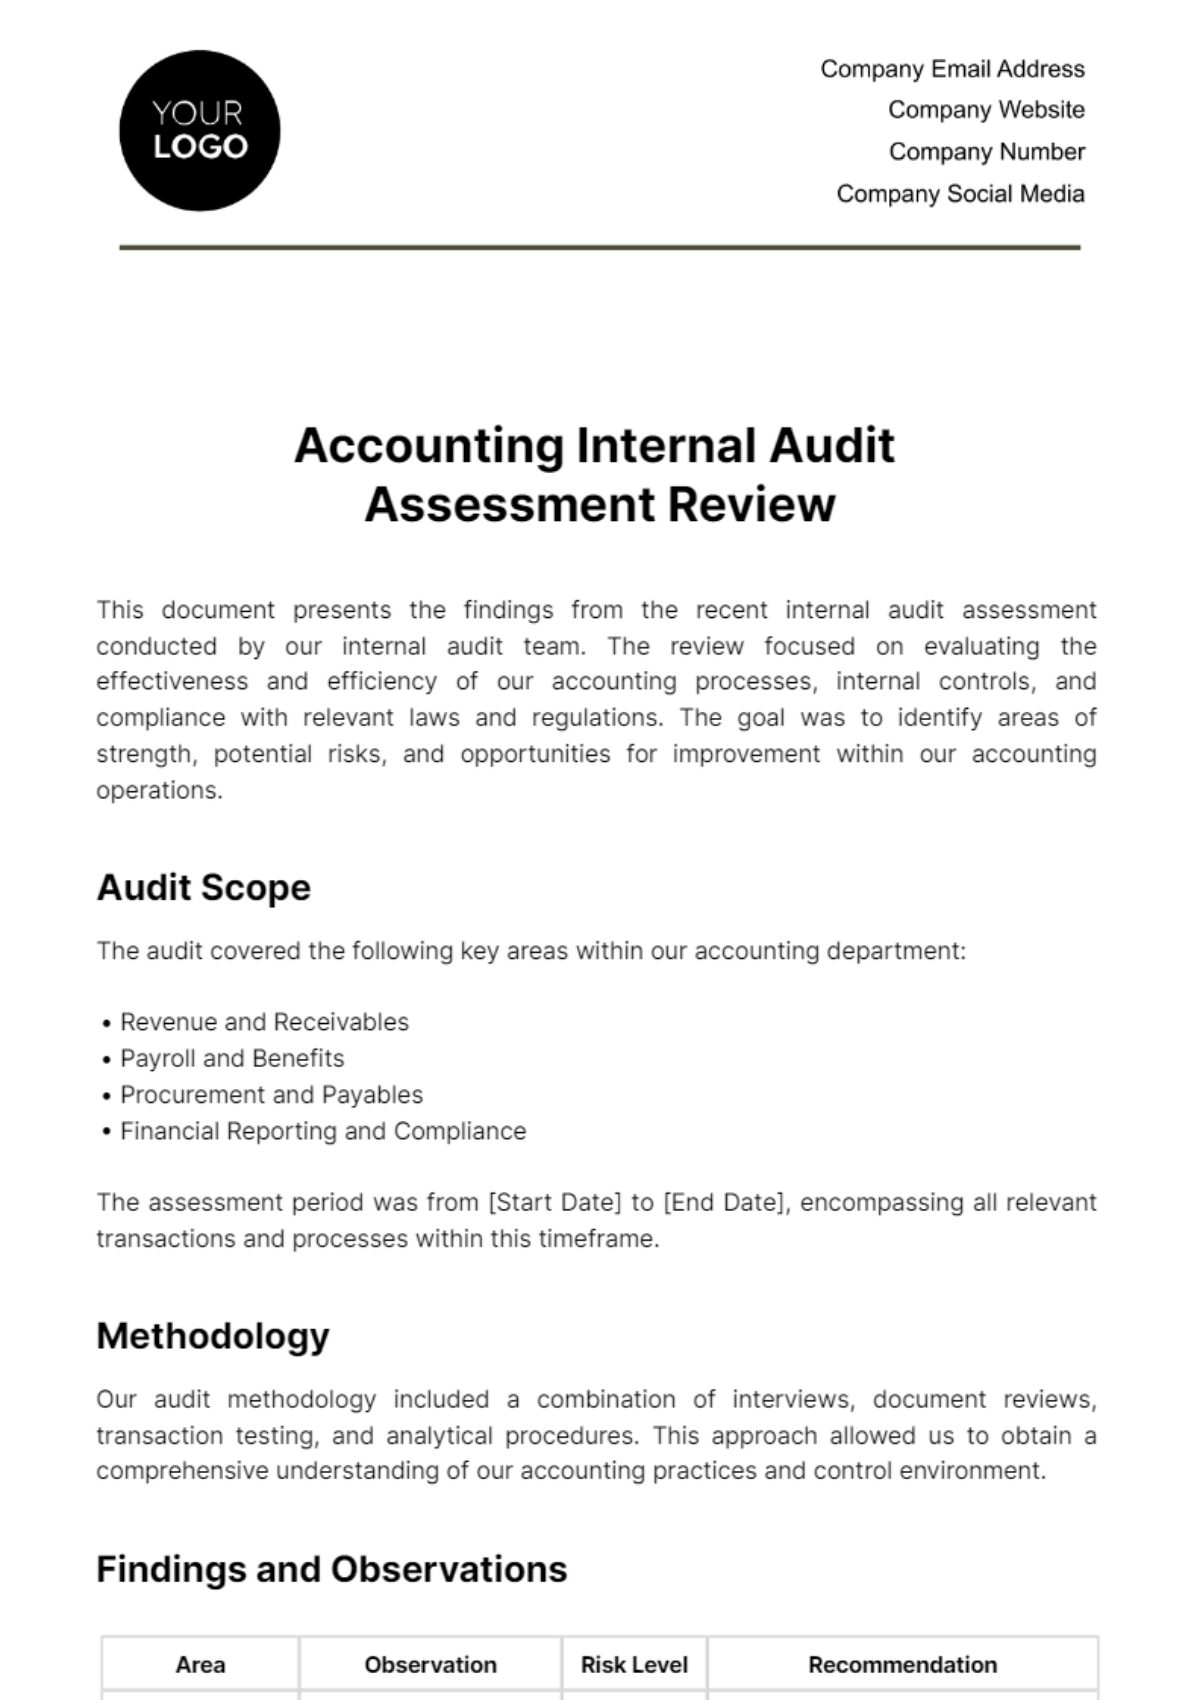 Free Accounting Internal Audit Assessment Review Template